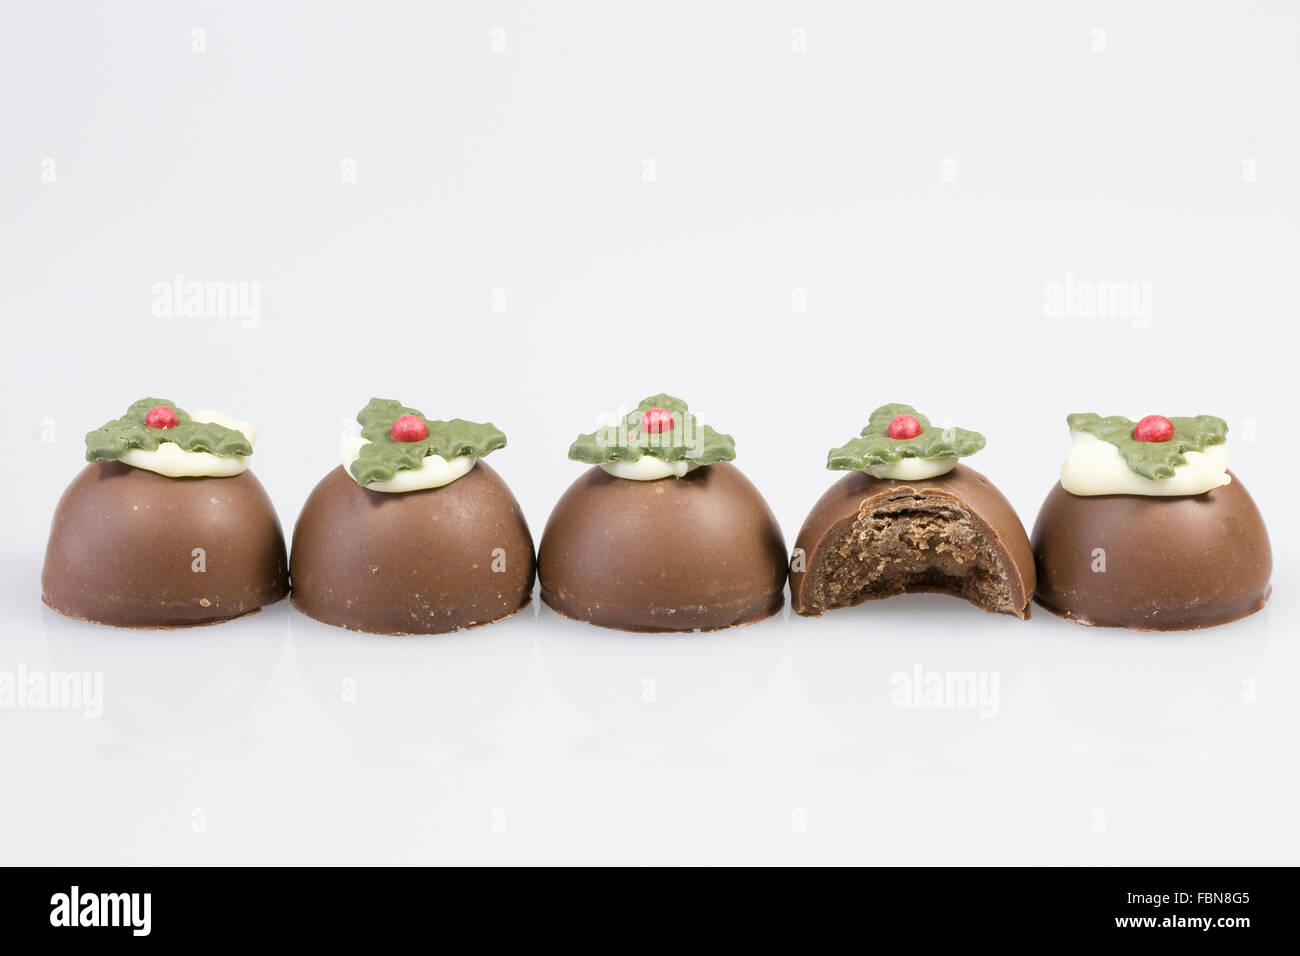 Chocolate christmas puddings on a white background. Stock Photo